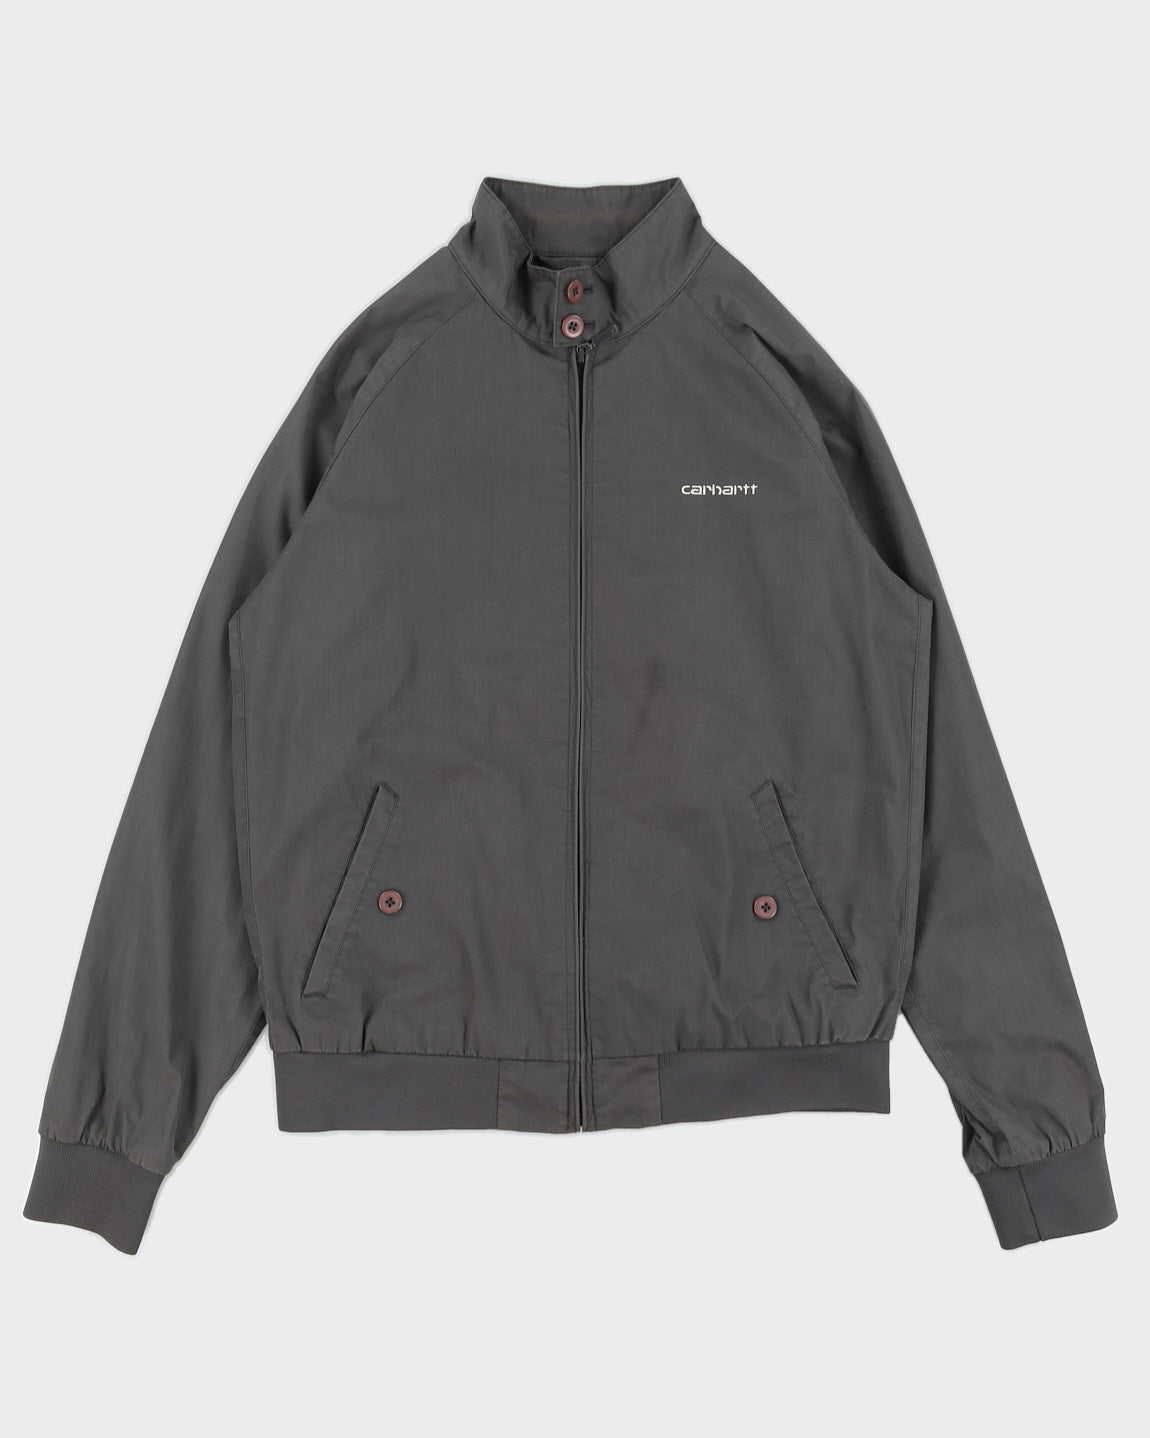 Carhartt Grey Embroidery Front Rude Jacket - M